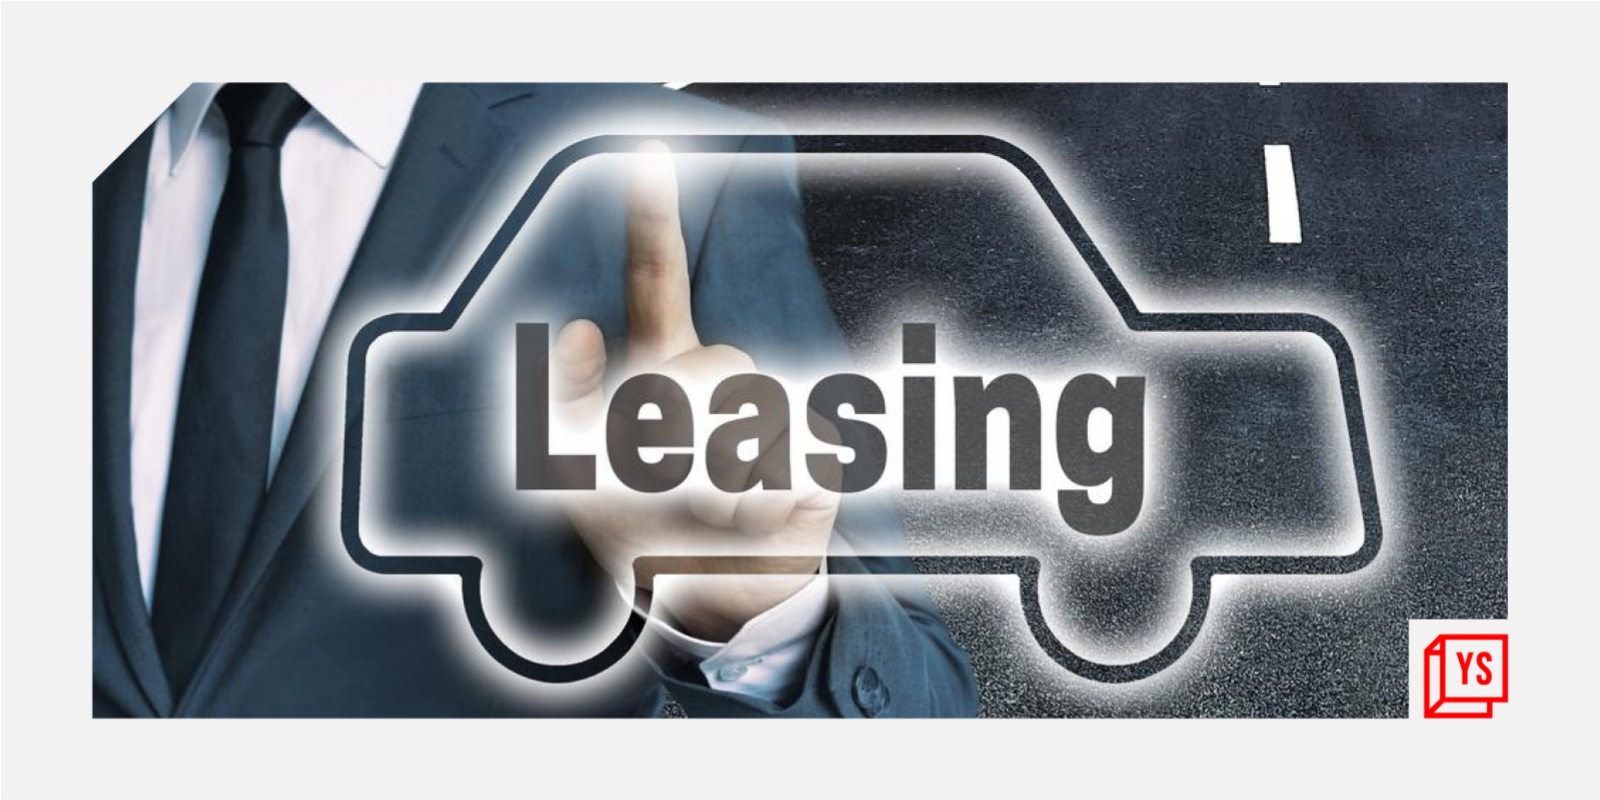 Why car leasing and subscription-based models are gaining traction among consumers

